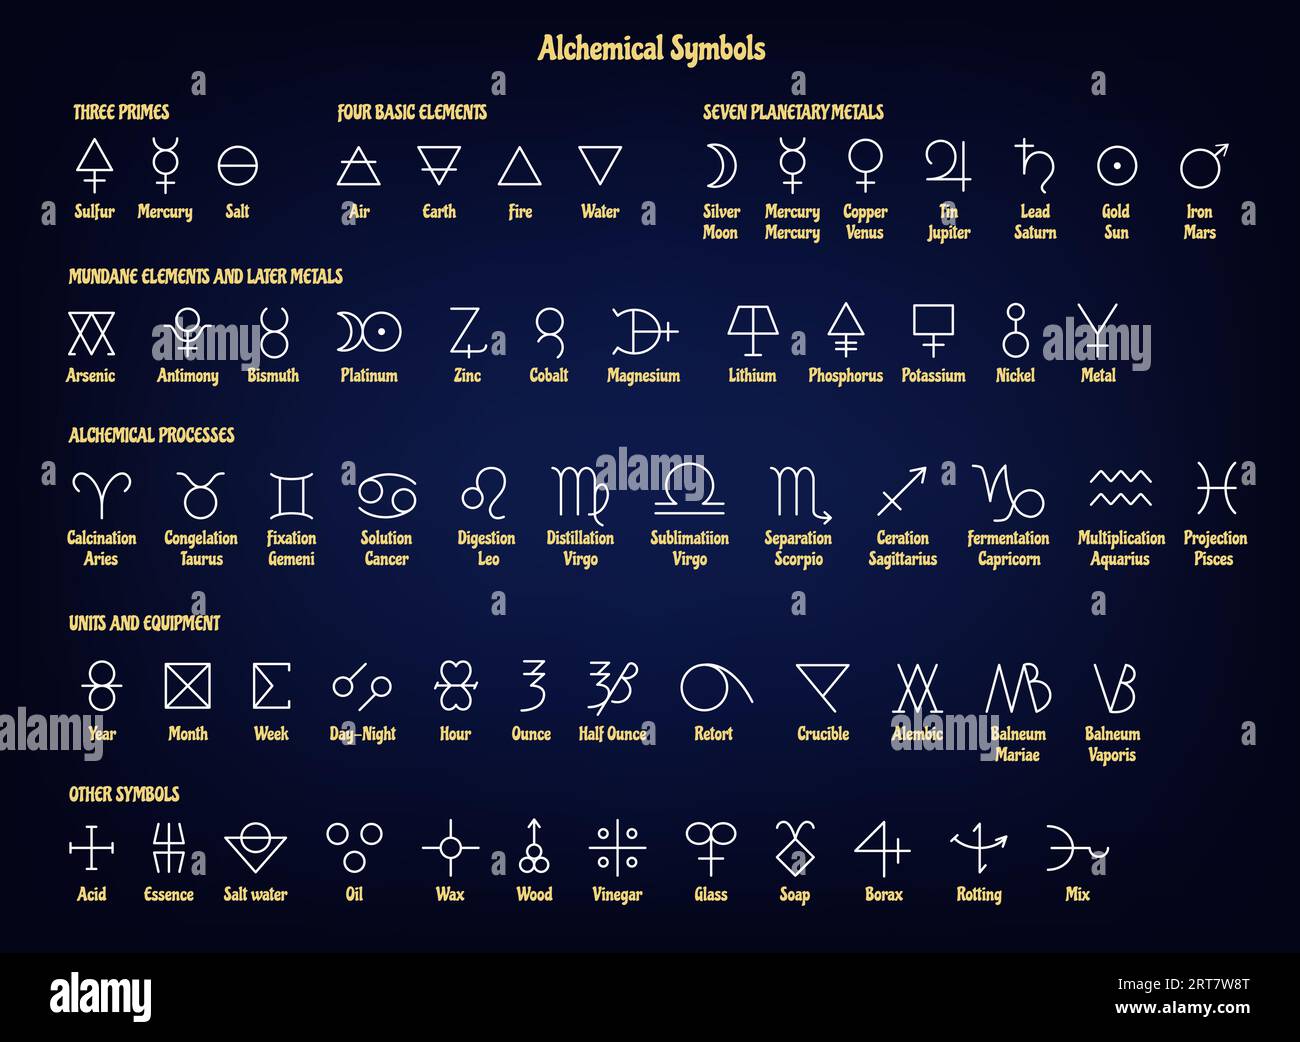 Alchemical symbols. Ancient alchemy signs of primes, basic and mundane elements, planetary and later metals, processes, units and equipment mystery Stock Vector